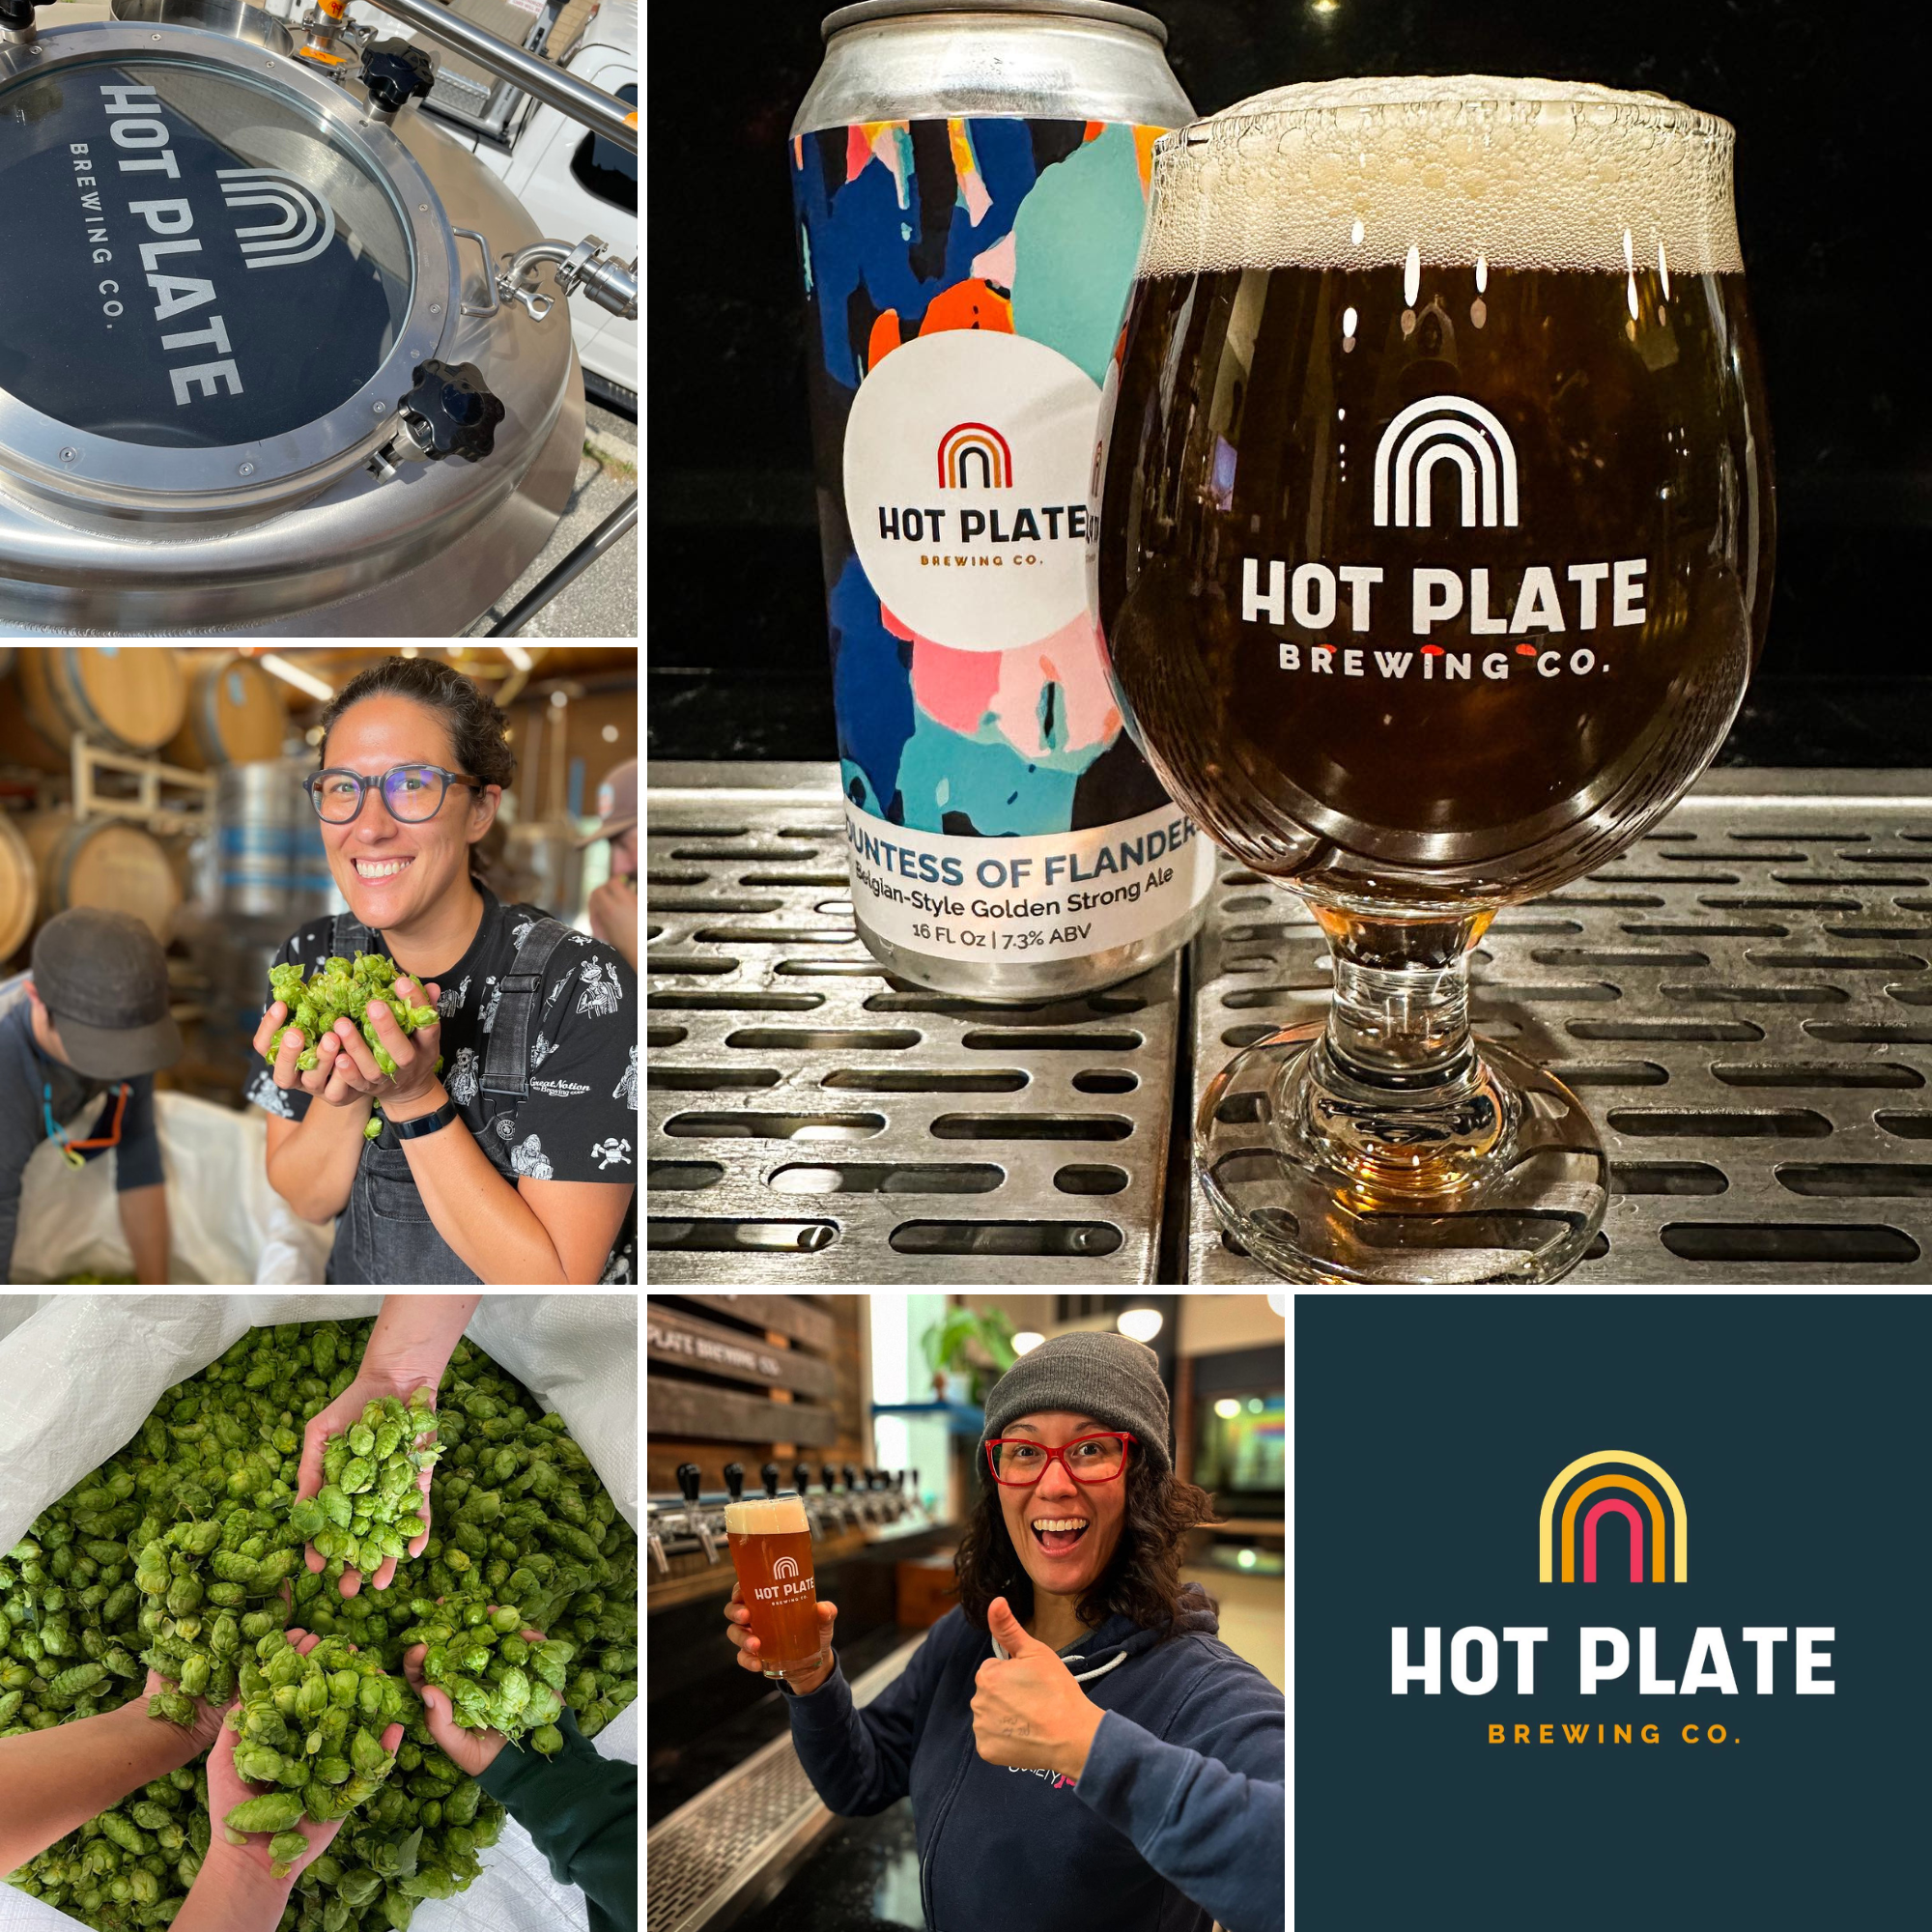 Hot Plate Brewing Co. Pittsfield MA